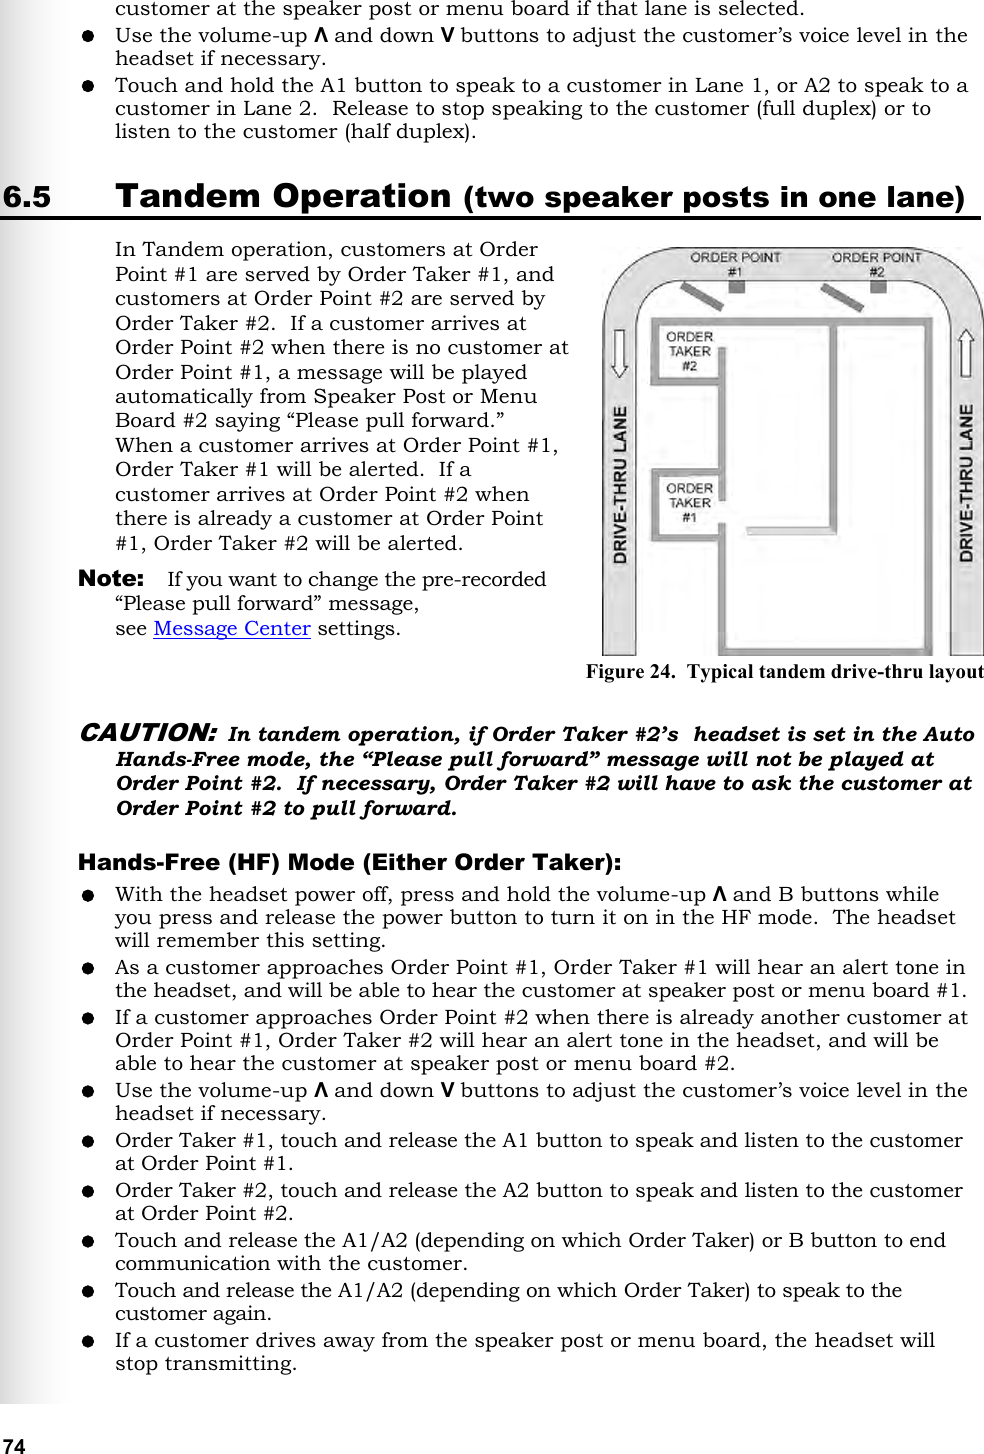   74 customer at the speaker post or menu board if that lane is selected.  Use the volume-up Λ and down V buttons to adjust the customer’s voice level in the headset if necessary.  Touch and hold the A1 button to speak to a customer in Lane 1, or A2 to speak to a customer in Lane 2.  Release to stop speaking to the customer (full duplex) or to listen to the customer (half duplex). 6.5 Tandem Operation (two speaker posts in one lane) In Tandem operation, customers at Order Point #1 are served by Order Taker #1, and customers at Order Point #2 are served by Order Taker #2.  If a customer arrives at Order Point #2 when there is no customer at Order Point #1, a message will be played automatically from Speaker Post or Menu Board #2 saying “Please pull forward.”  When a customer arrives at Order Point #1, Order Taker #1 will be alerted.  If a customer arrives at Order Point #2 when there is already a customer at Order Point #1, Order Taker #2 will be alerted. Note:  If you want to change the pre-recorded “Please pull forward” message,  see Message Center settings.  CAUTION: In tandem operation, if Order Taker #2’s  headset is set in the Auto Hands-Free mode, the “Please pull forward” message will not be played at Order Point #2.  If necessary, Order Taker #2 will have to ask the customer at Order Point #2 to pull forward. Hands-Free (HF) Mode (Either Order Taker):  With the headset power off, press and hold the volume-up Λ and B buttons while you press and release the power button to turn it on in the HF mode.  The headset will remember this setting.  As a customer approaches Order Point #1, Order Taker #1 will hear an alert tone in the headset, and will be able to hear the customer at speaker post or menu board #1.   If a customer approaches Order Point #2 when there is already another customer at Order Point #1, Order Taker #2 will hear an alert tone in the headset, and will be able to hear the customer at speaker post or menu board #2.  Use the volume-up Λ and down V buttons to adjust the customer’s voice level in the headset if necessary.  Order Taker #1, touch and release the A1 button to speak and listen to the customer at Order Point #1.   Order Taker #2, touch and release the A2 button to speak and listen to the customer at Order Point #2.  Touch and release the A1/A2 (depending on which Order Taker) or B button to end communication with the customer.  Touch and release the A1/A2 (depending on which Order Taker) to speak to the customer again.  If a customer drives away from the speaker post or menu board, the headset will stop transmitting. Figure 24.  Typical tandem drive-thru layout 